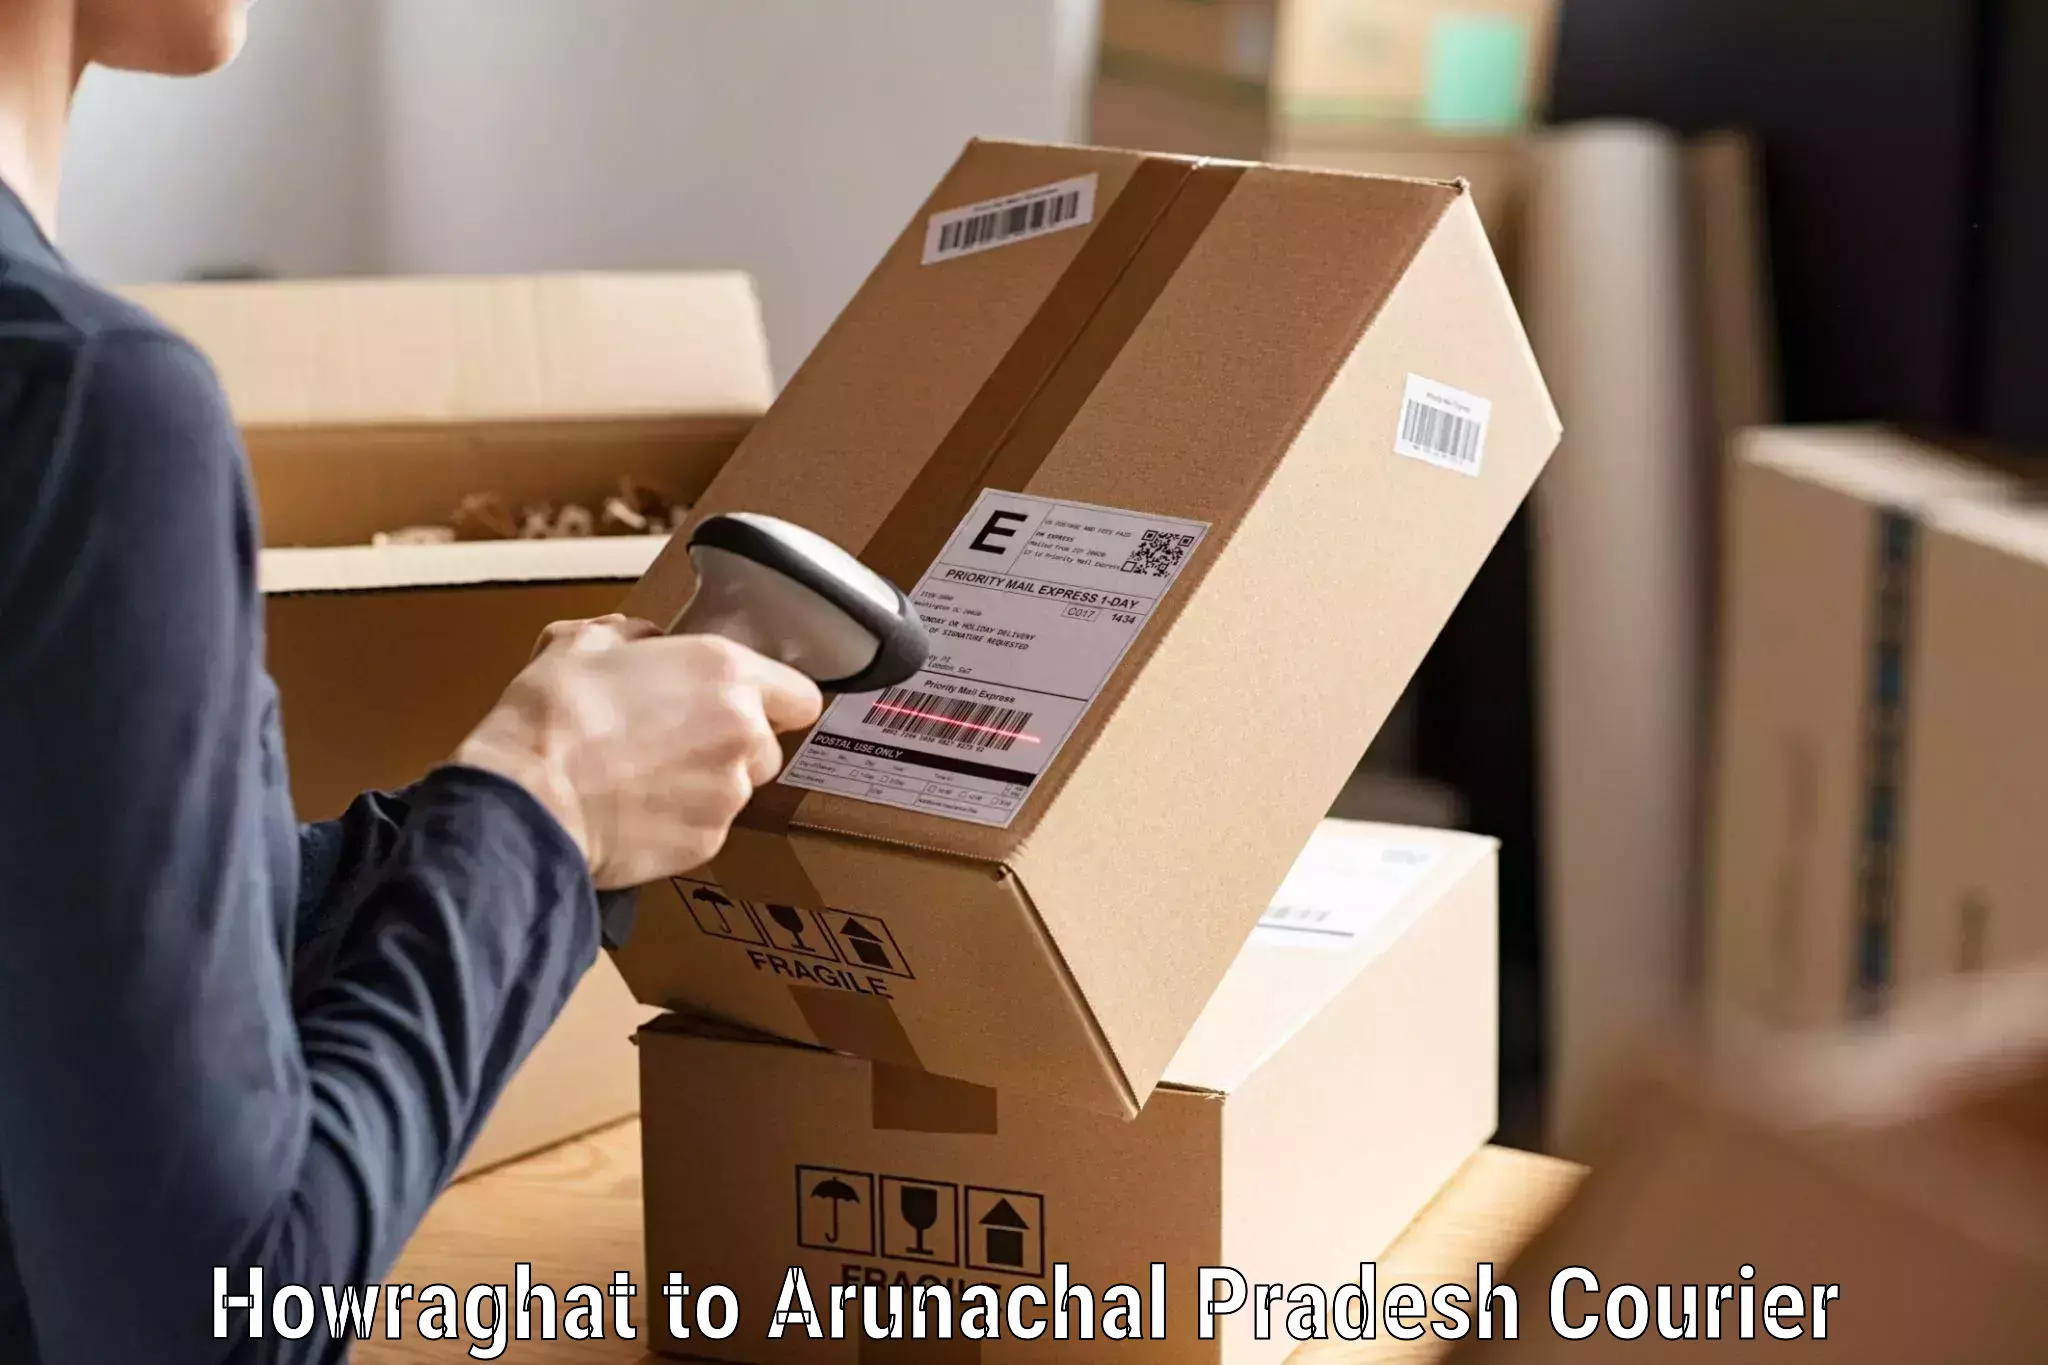 On-call courier service Howraghat to Roing